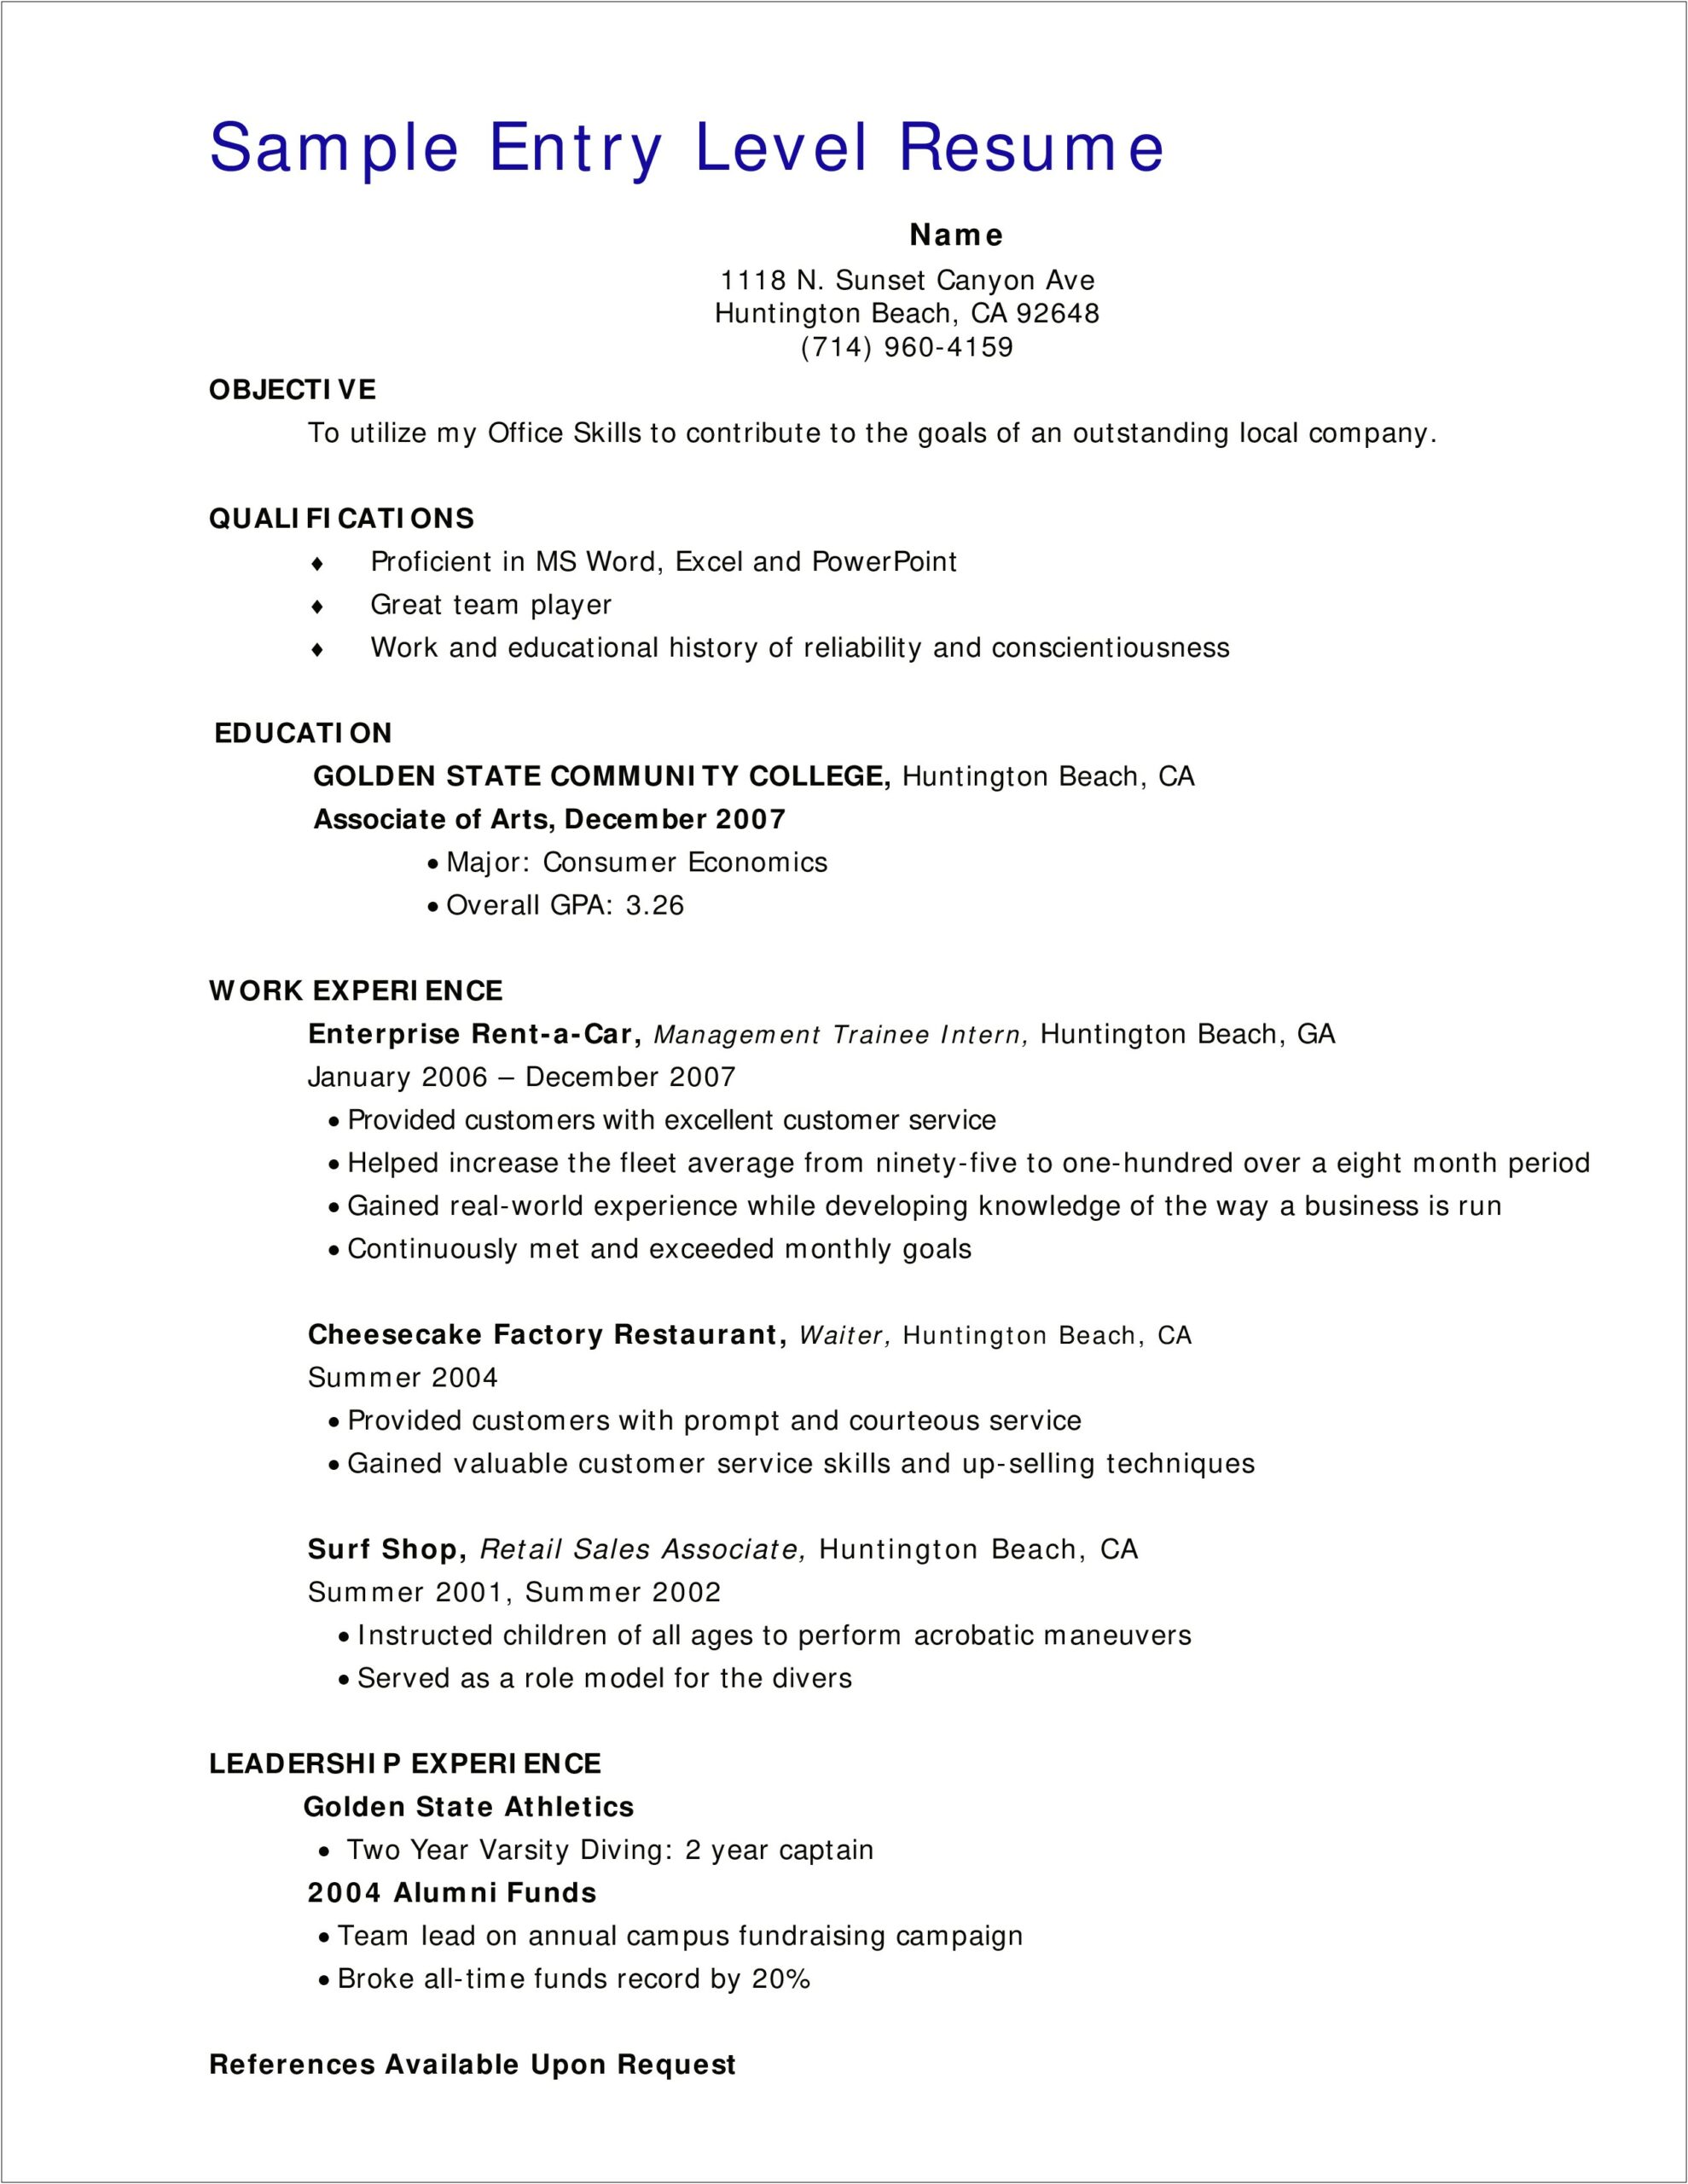 Resume For Sales Associate With No Work Experience